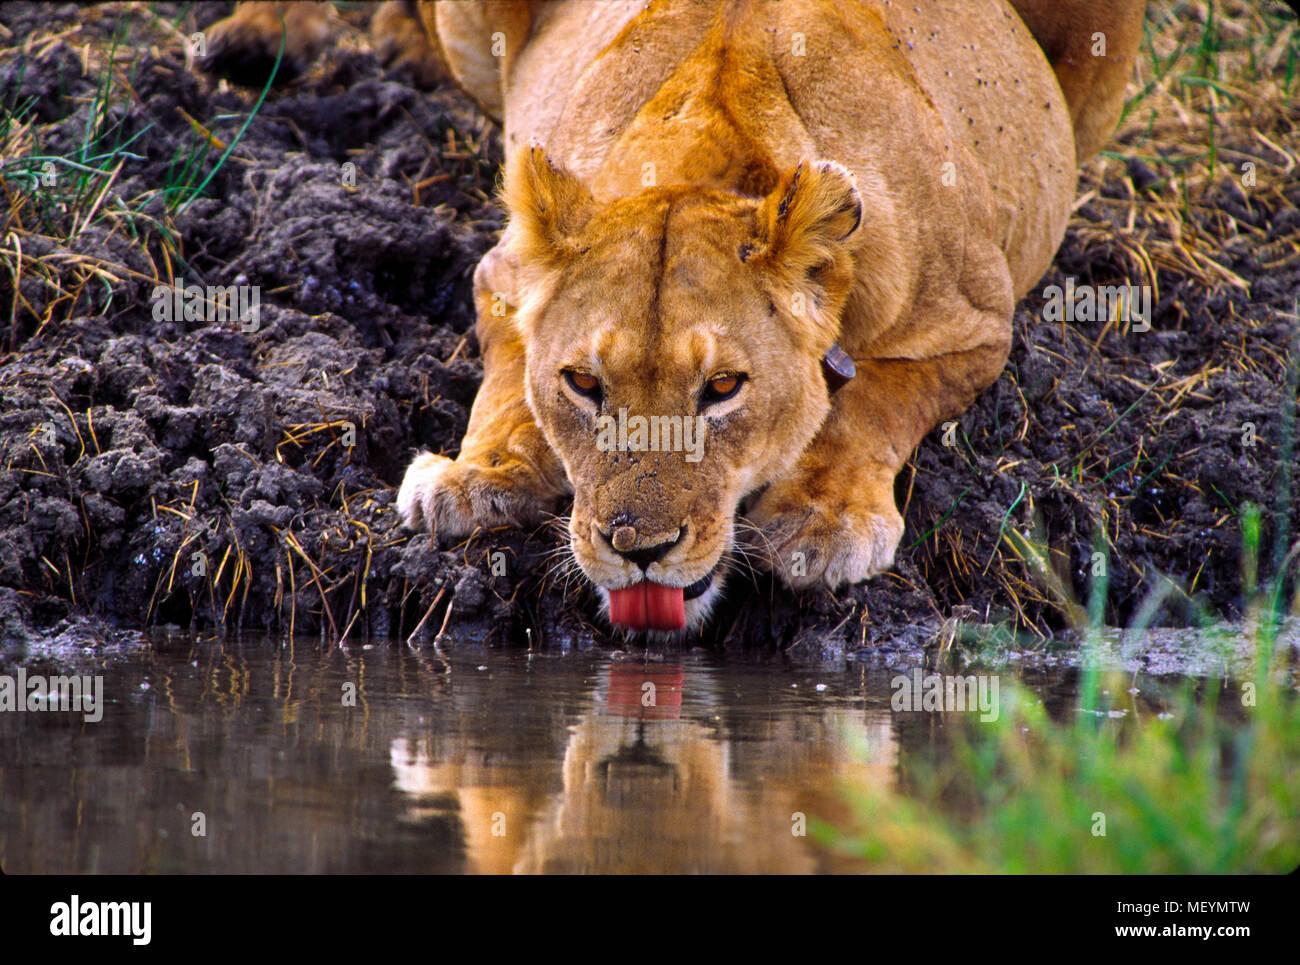 Lioness drinking from a waterhole, Serengeti National Park, Tanzania. Lion population across African continent has plummeted from 200,000 in 1980s to  Stock Photo